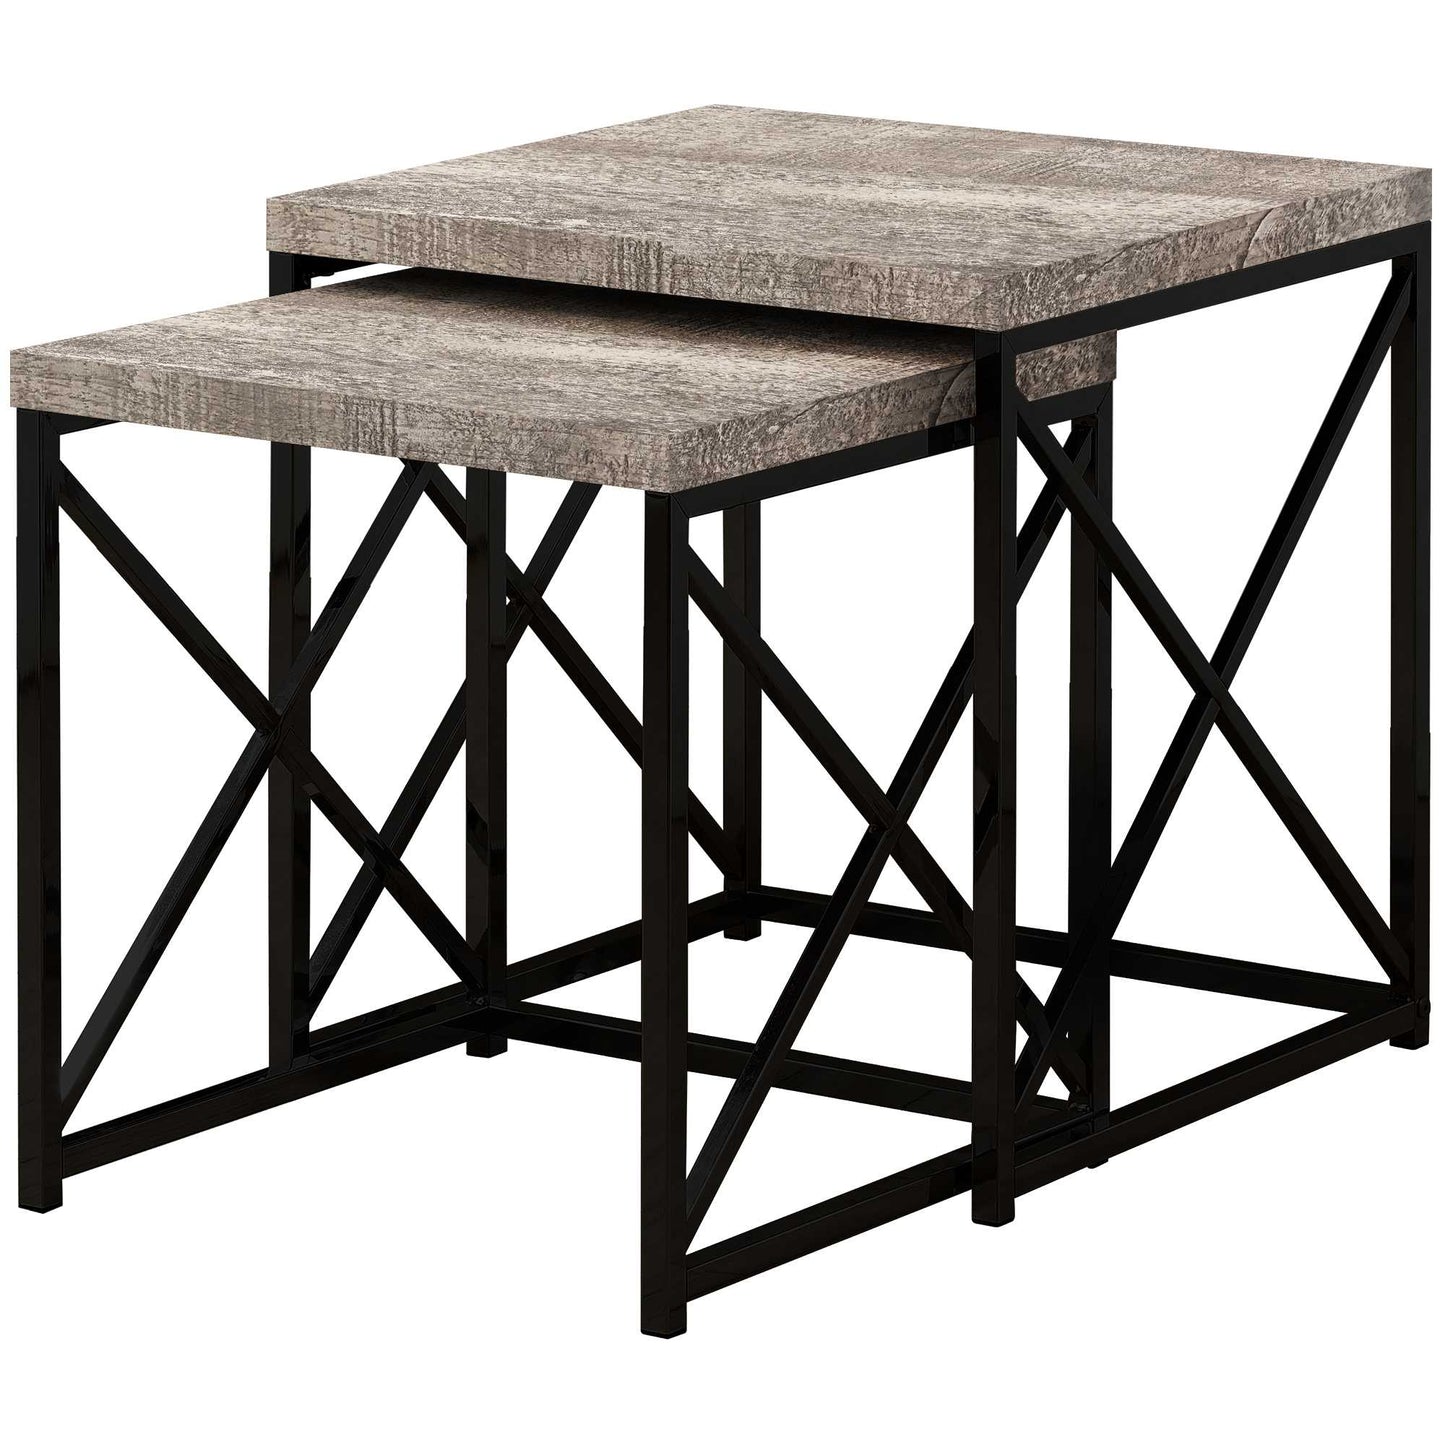 37.25" x 37.25" x 40.5" Taupe Black Particle Board Metal 2pcs Nesting Table Set